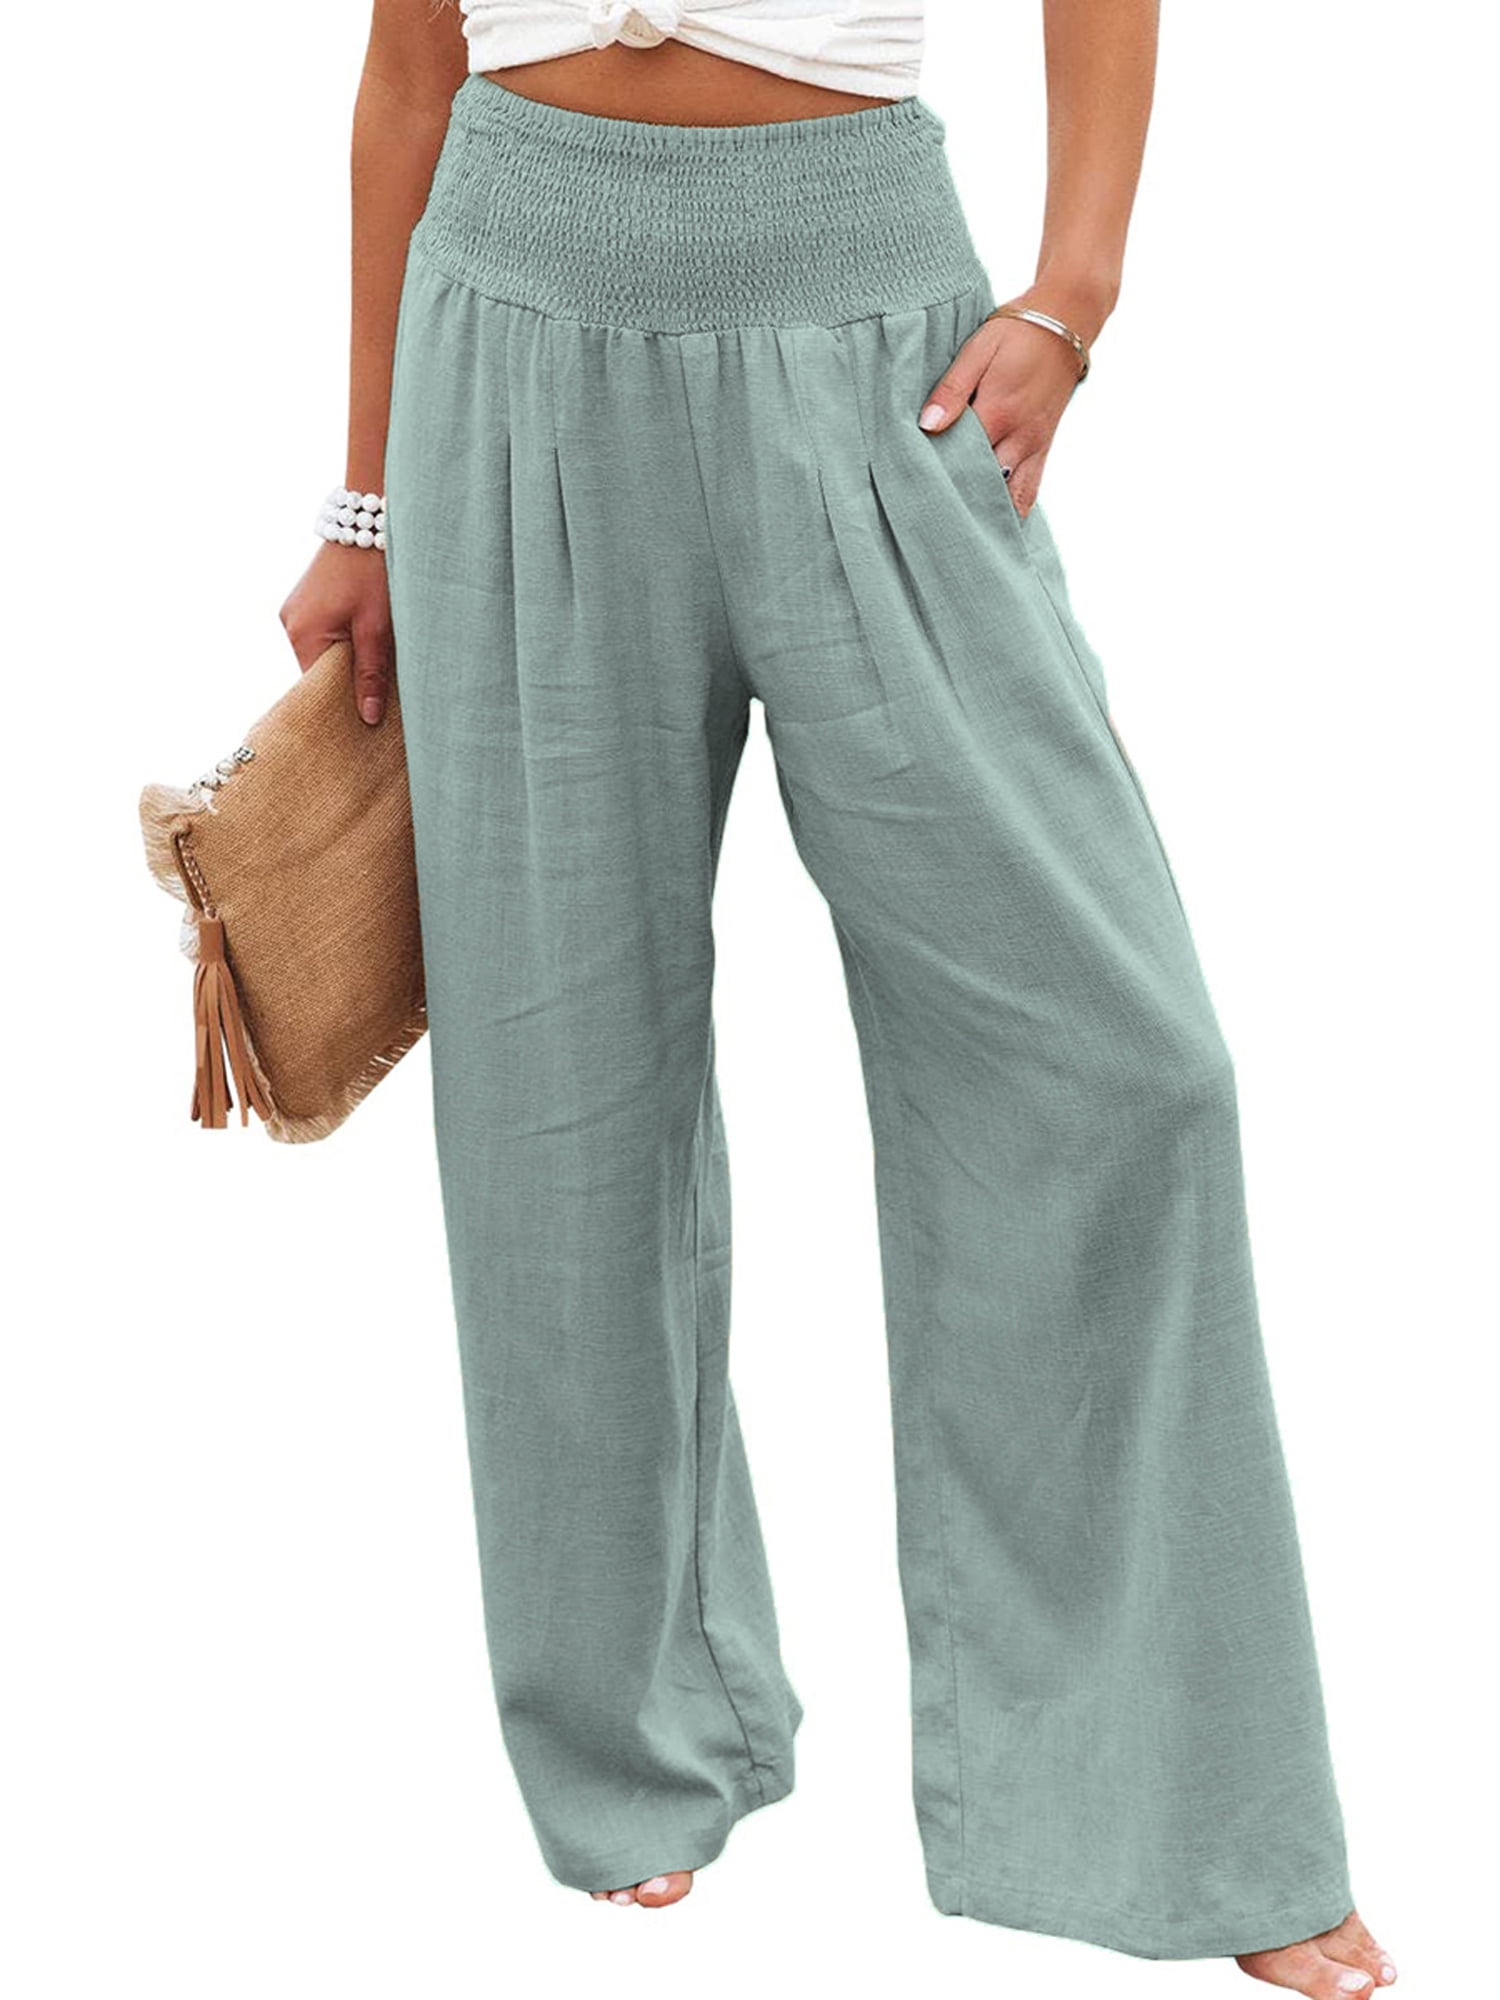 JYYYBF Women Casual Loose Cotton Linen Pants with Pocket Lady